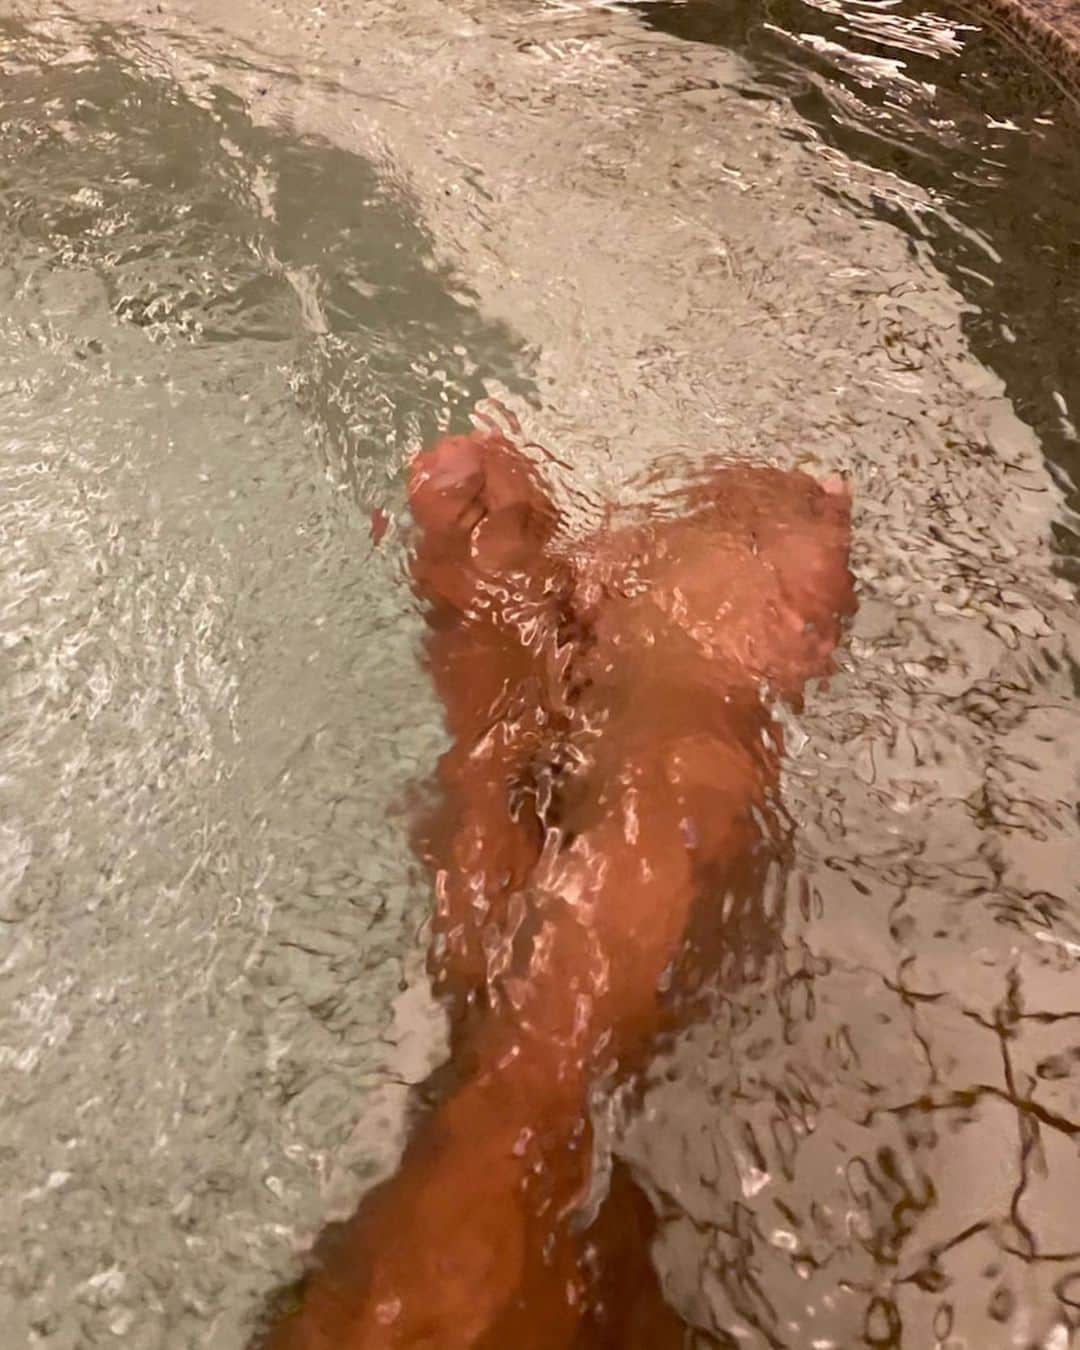 市川海老蔵 （11代目）さんのインスタグラム写真 - (市川海老蔵 （11代目）Instagram)「Done with the stage and now bath time🛀. Four more days to go - I’m thinking over this performance.  Anyhow, such a nice bath-, bathing after stage & workout makes you get warm inside your body.  This time’s Hakata stay, I’m mostly staying at the hotel, and there was a discovery of what kind of person I, myself, is.  Under normal circumstances  I would go out whenever I want to, but in an area where that’s not possible, plus without my family and so just by myself, you get to meet yourself that you hadn’t noticed while spending such a time.  Good thing I became aware of that. Was a great learning period, but wait, it’s still early to wrap up I’ve got four more days to go...  Thank you for your support.  haha💦 * 終わりまして 風呂🛀。 残り4日かぁ～ と振り返ってます。  しかしいい湯だぁ~、 舞台終えてトレーニング終えての 風呂は 芯から温まる感じですね。  今回の博多で ほぼホテル暮らしですが、 はじめて自分ってこんな感じの人なんだーと 発見もありました。  普段ですと 出掛けたい時に 出かけるわけですが それが出来ない空間で しかも家族もいないで一人で その時間を過ごすと 思いもよらない自分に会えたりしましたね。  気がつけて良かった。 勉強になったな、 と振り返るのもまだ早い あと4日。。  よろしくお願いします。 笑笑💦  #市川海老蔵 #海老蔵 #成田屋 #歌舞伎  #歌舞伎座 #和 #舞台 #ABKAI #ABMORI #ebizoichikawa #ebizo #kabuki #thunderparty #ebizotv #theater #theaterarts #actor #kabukiactor #japan #classic #traditionaljapan #japaneseculture #japan_og_insta #performingarts」11月21日 20時37分 - ebizoichikawa.ebizoichikawa